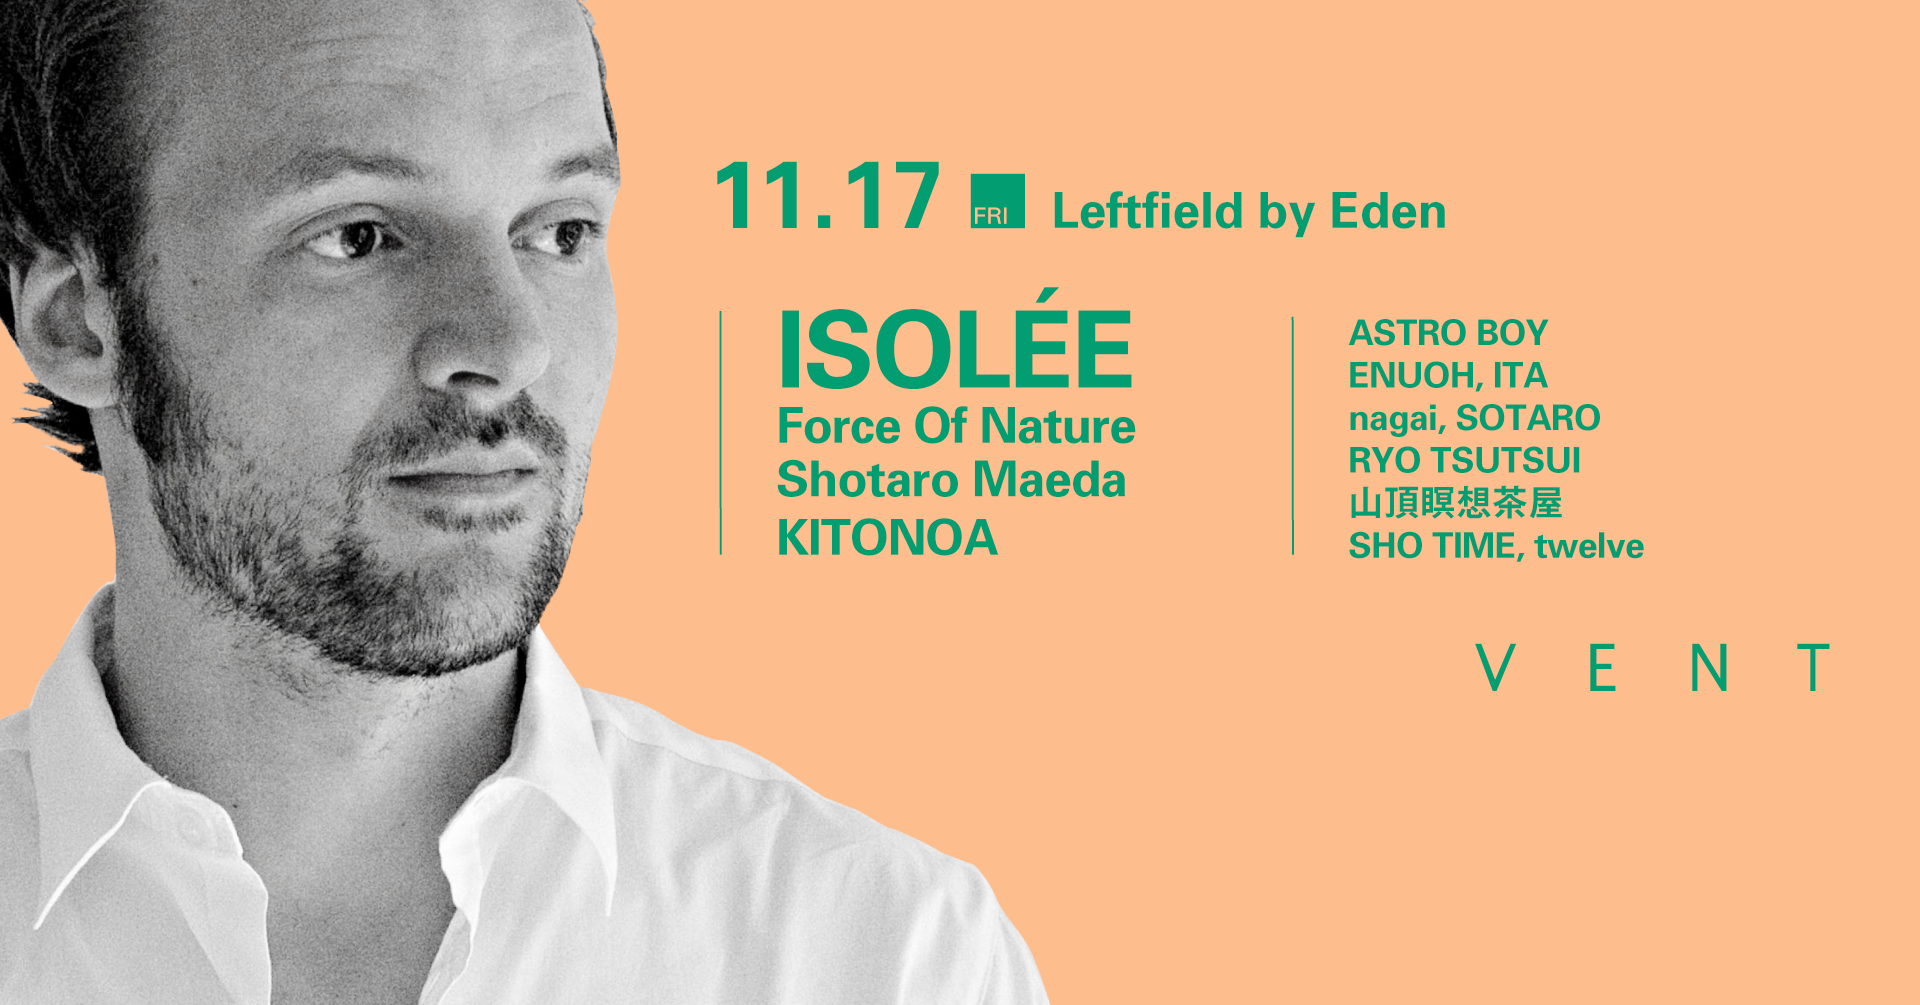 Isolée at Leftfield by Eden